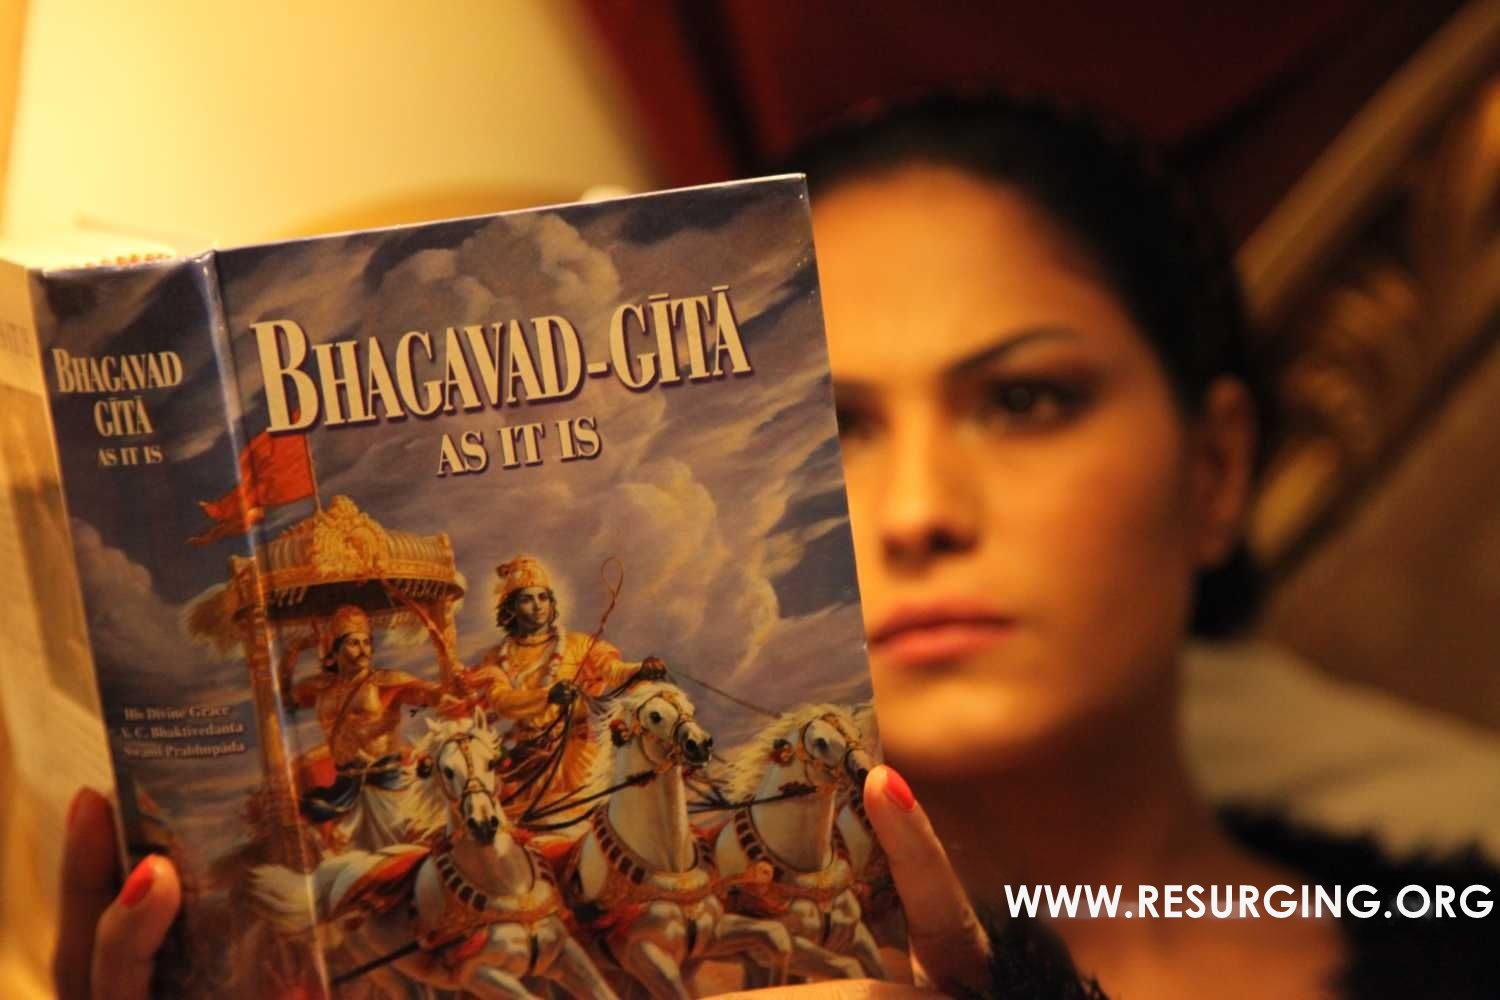 Buy research papers online cheap hindu dharma and caste system and the bhagavad gita